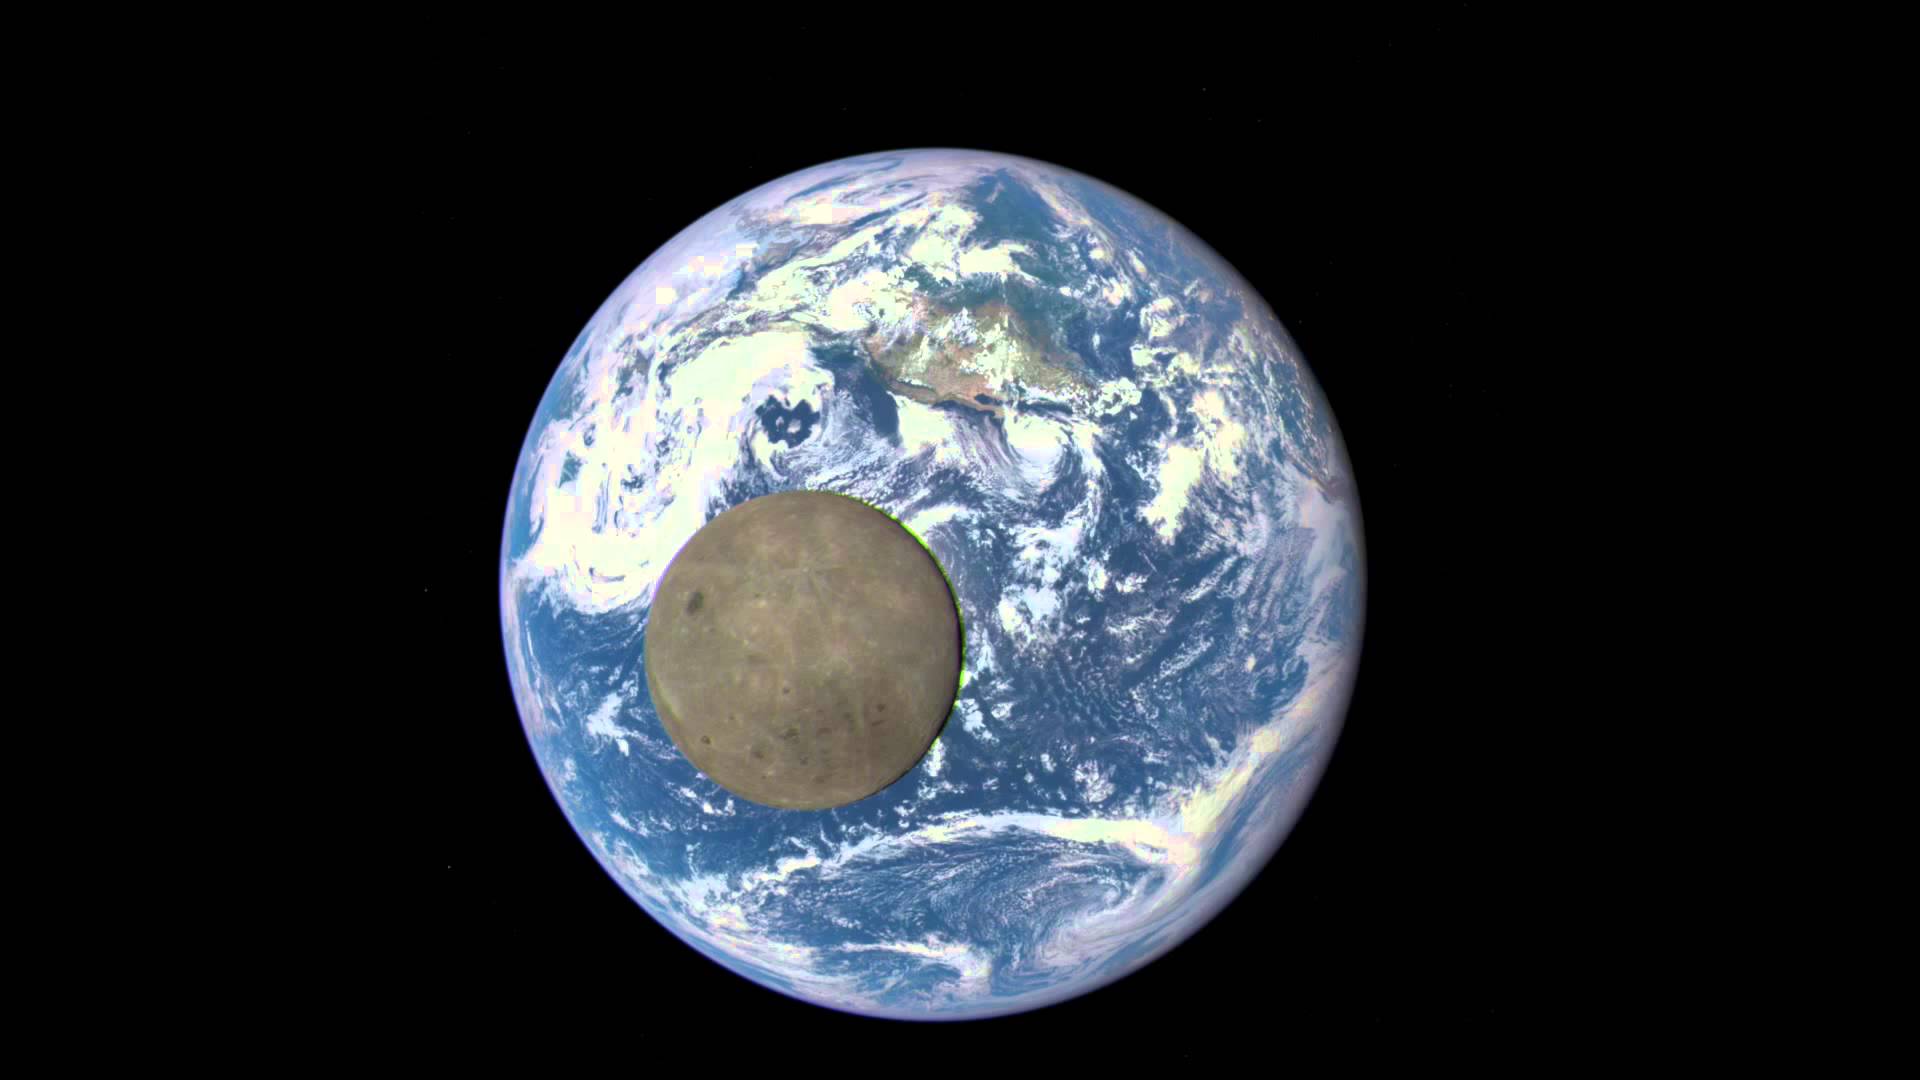 Nasa Releases An Epic View Of The Moon Transiting The Earth Taken